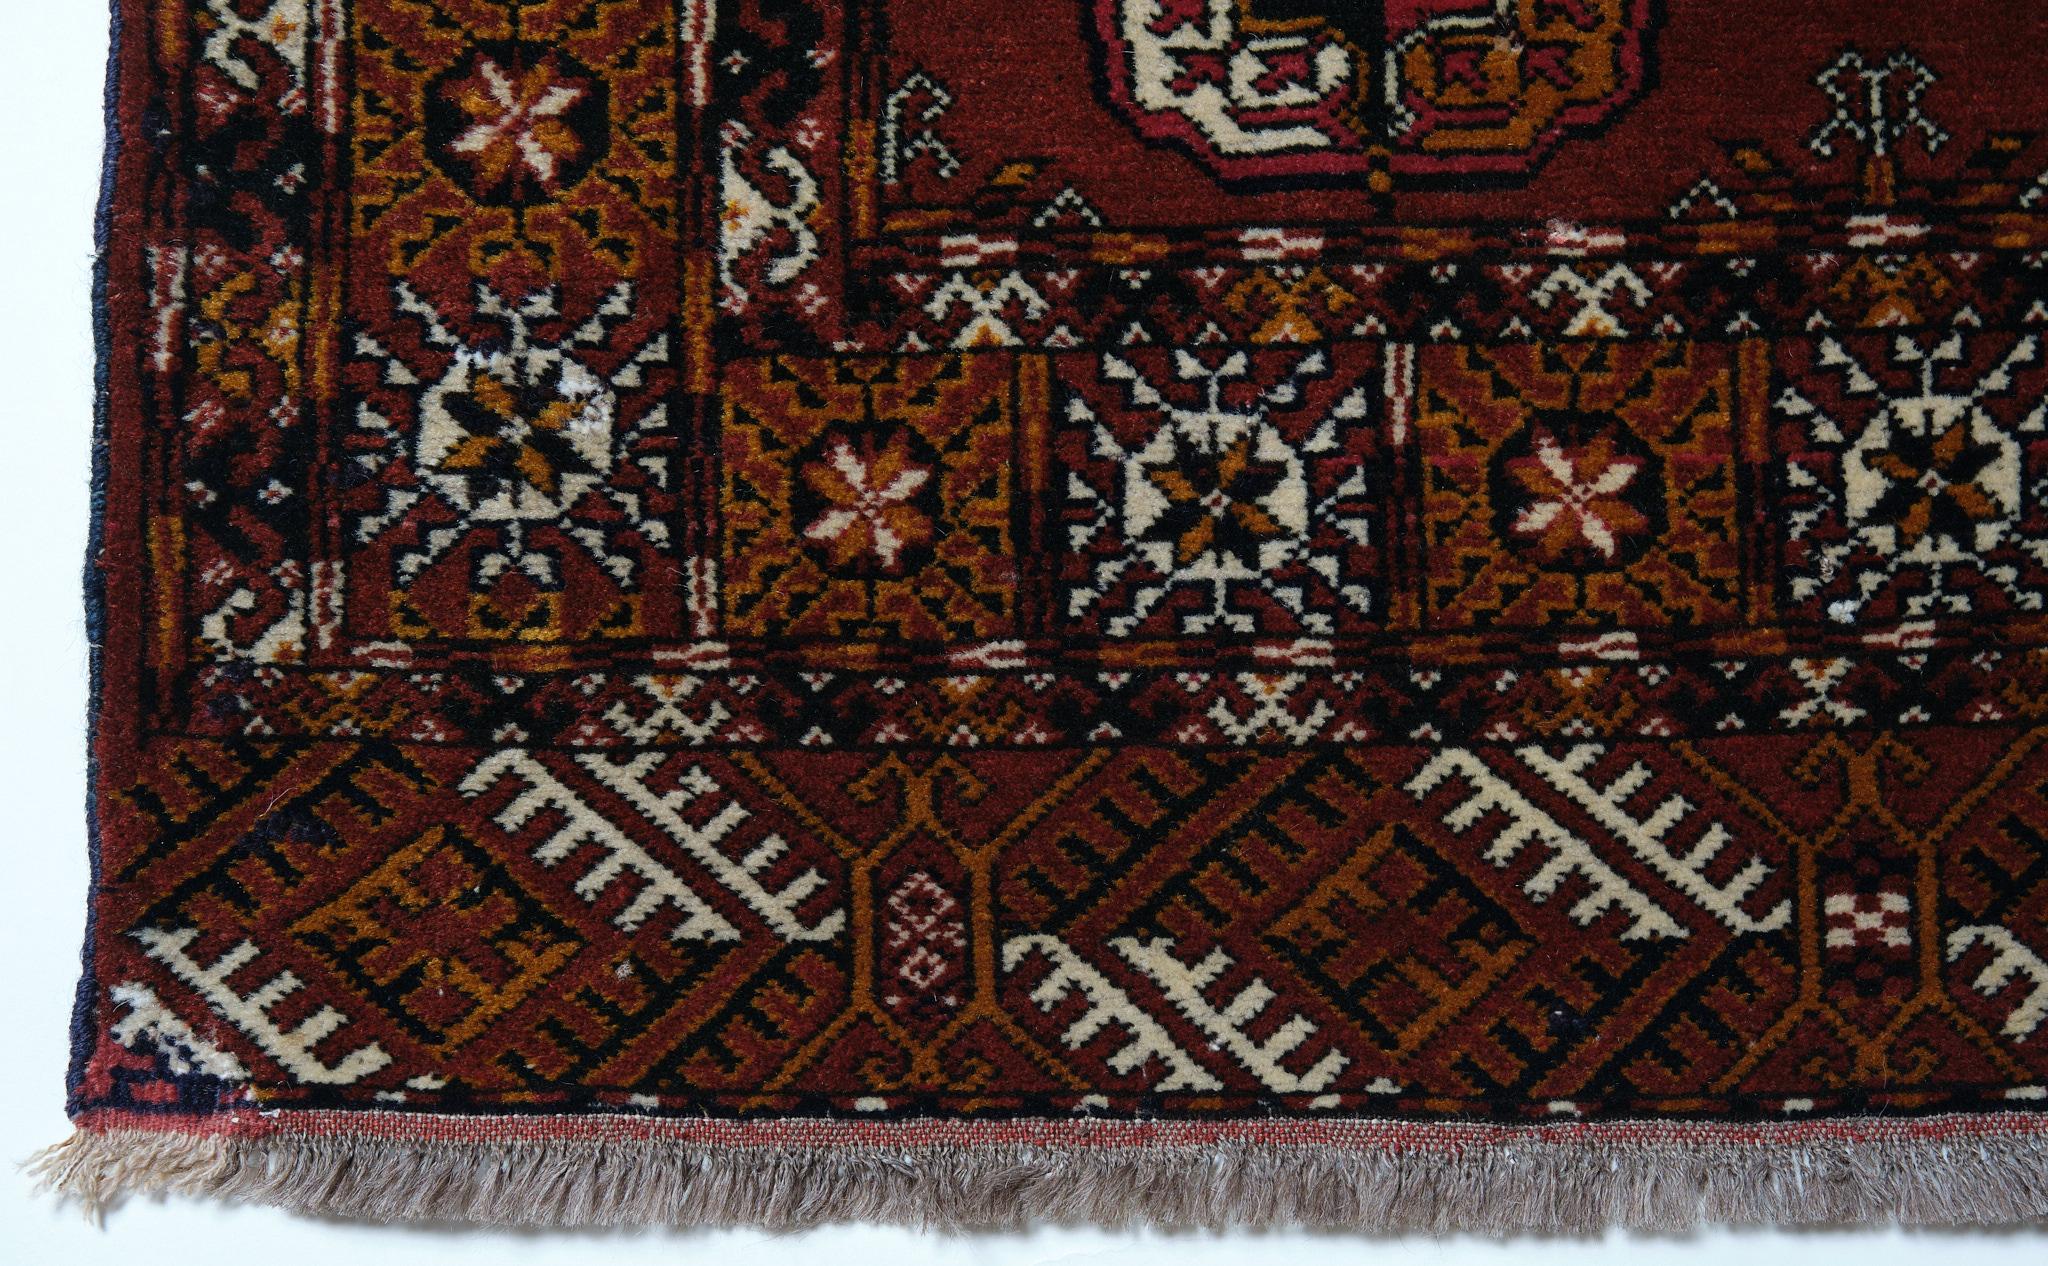 This is a Central Asian Old Tekke Bukhara Turkmen Carpet from the Turkmenistan Bukhara region with a rare and beautiful color composition.

Bukhara carpet (Turkmen Rug, Bokhara, Buhara, Bukhara) is the name of a tribal rug woven by the Turkmen